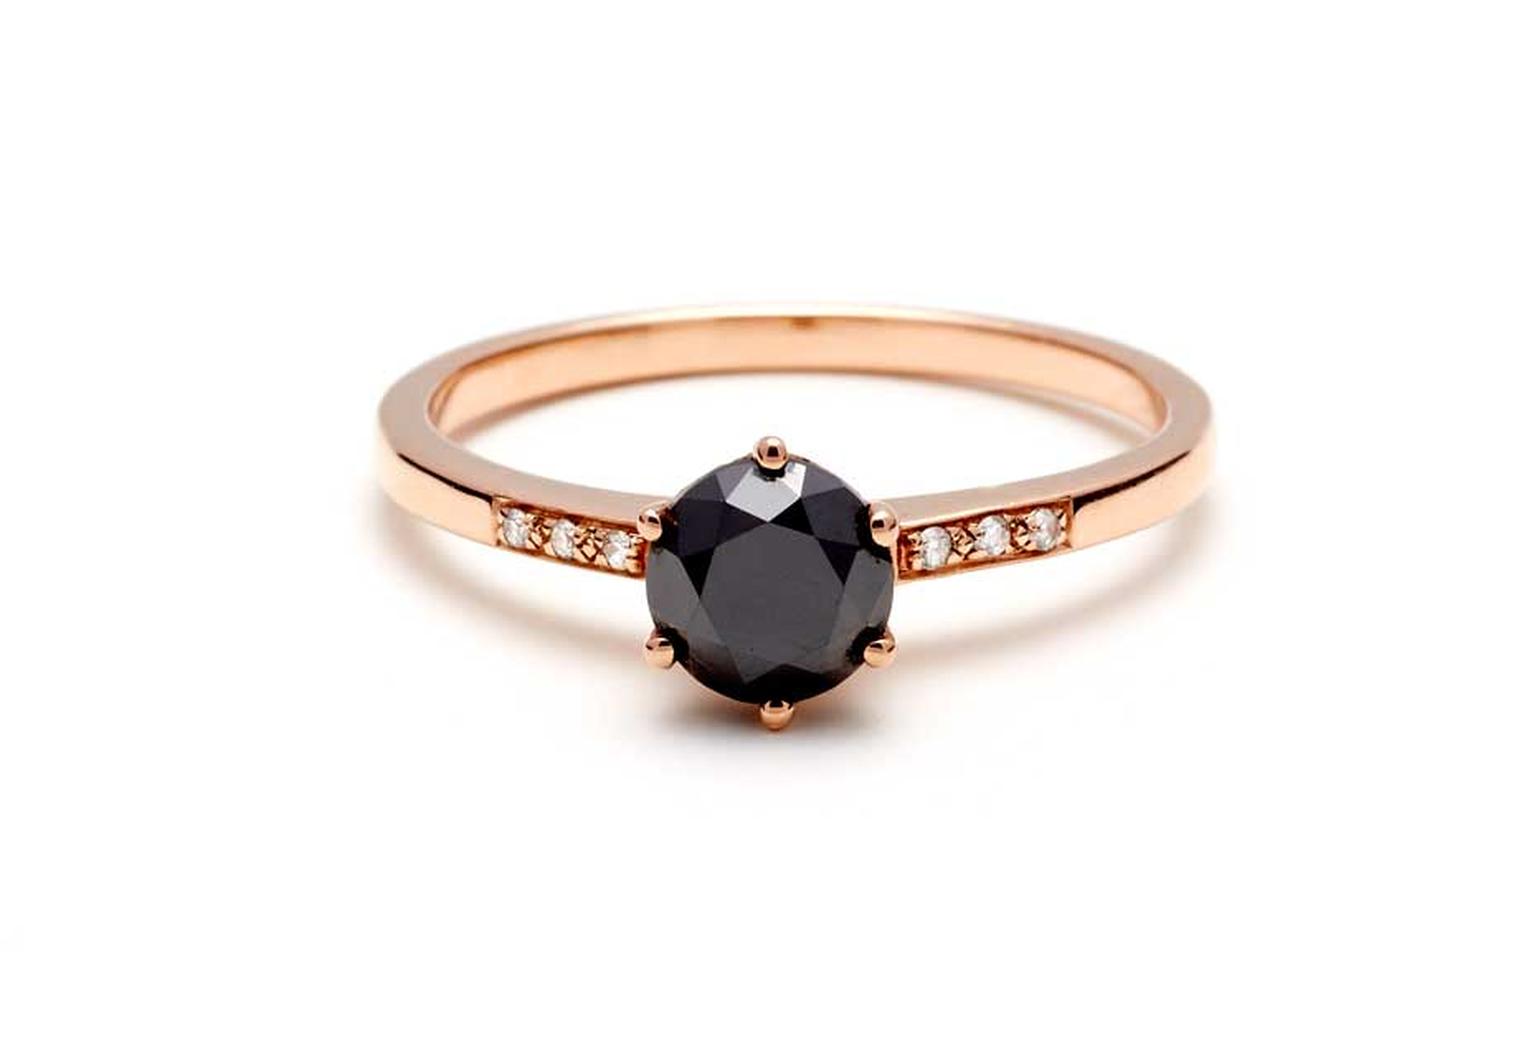 Anna Sheffield Hazeline rose gold engagement ring, set with a 1.0ct black diamond and white diamond accents.